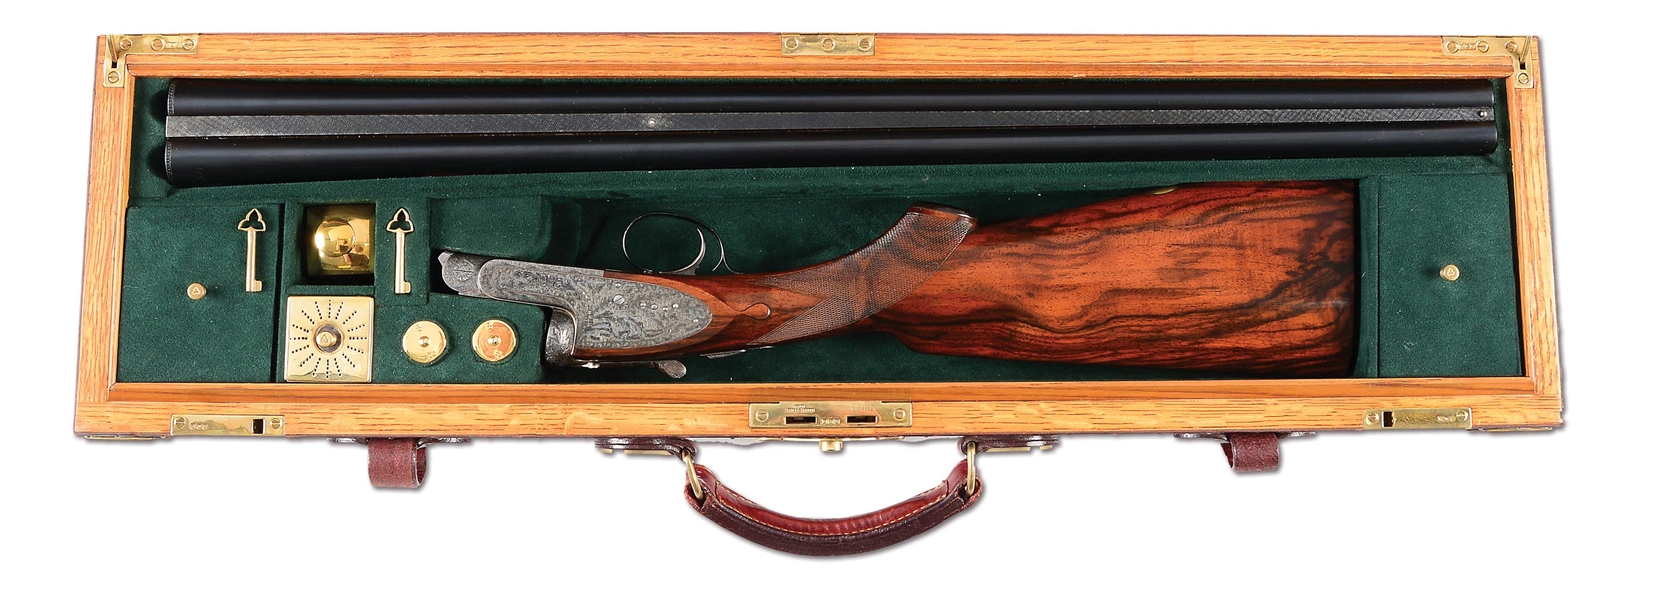 (M) EARLY IVO FABBRI SIDELOCK EJECTOR PICCIONE EXTRA LIVE PIGEON SHOTGUN WITH SUPERB BAROQUE SCROLL AND FLORAL ENGRAVING BY F. IORA WITH OAK AND LEATHER CASE.